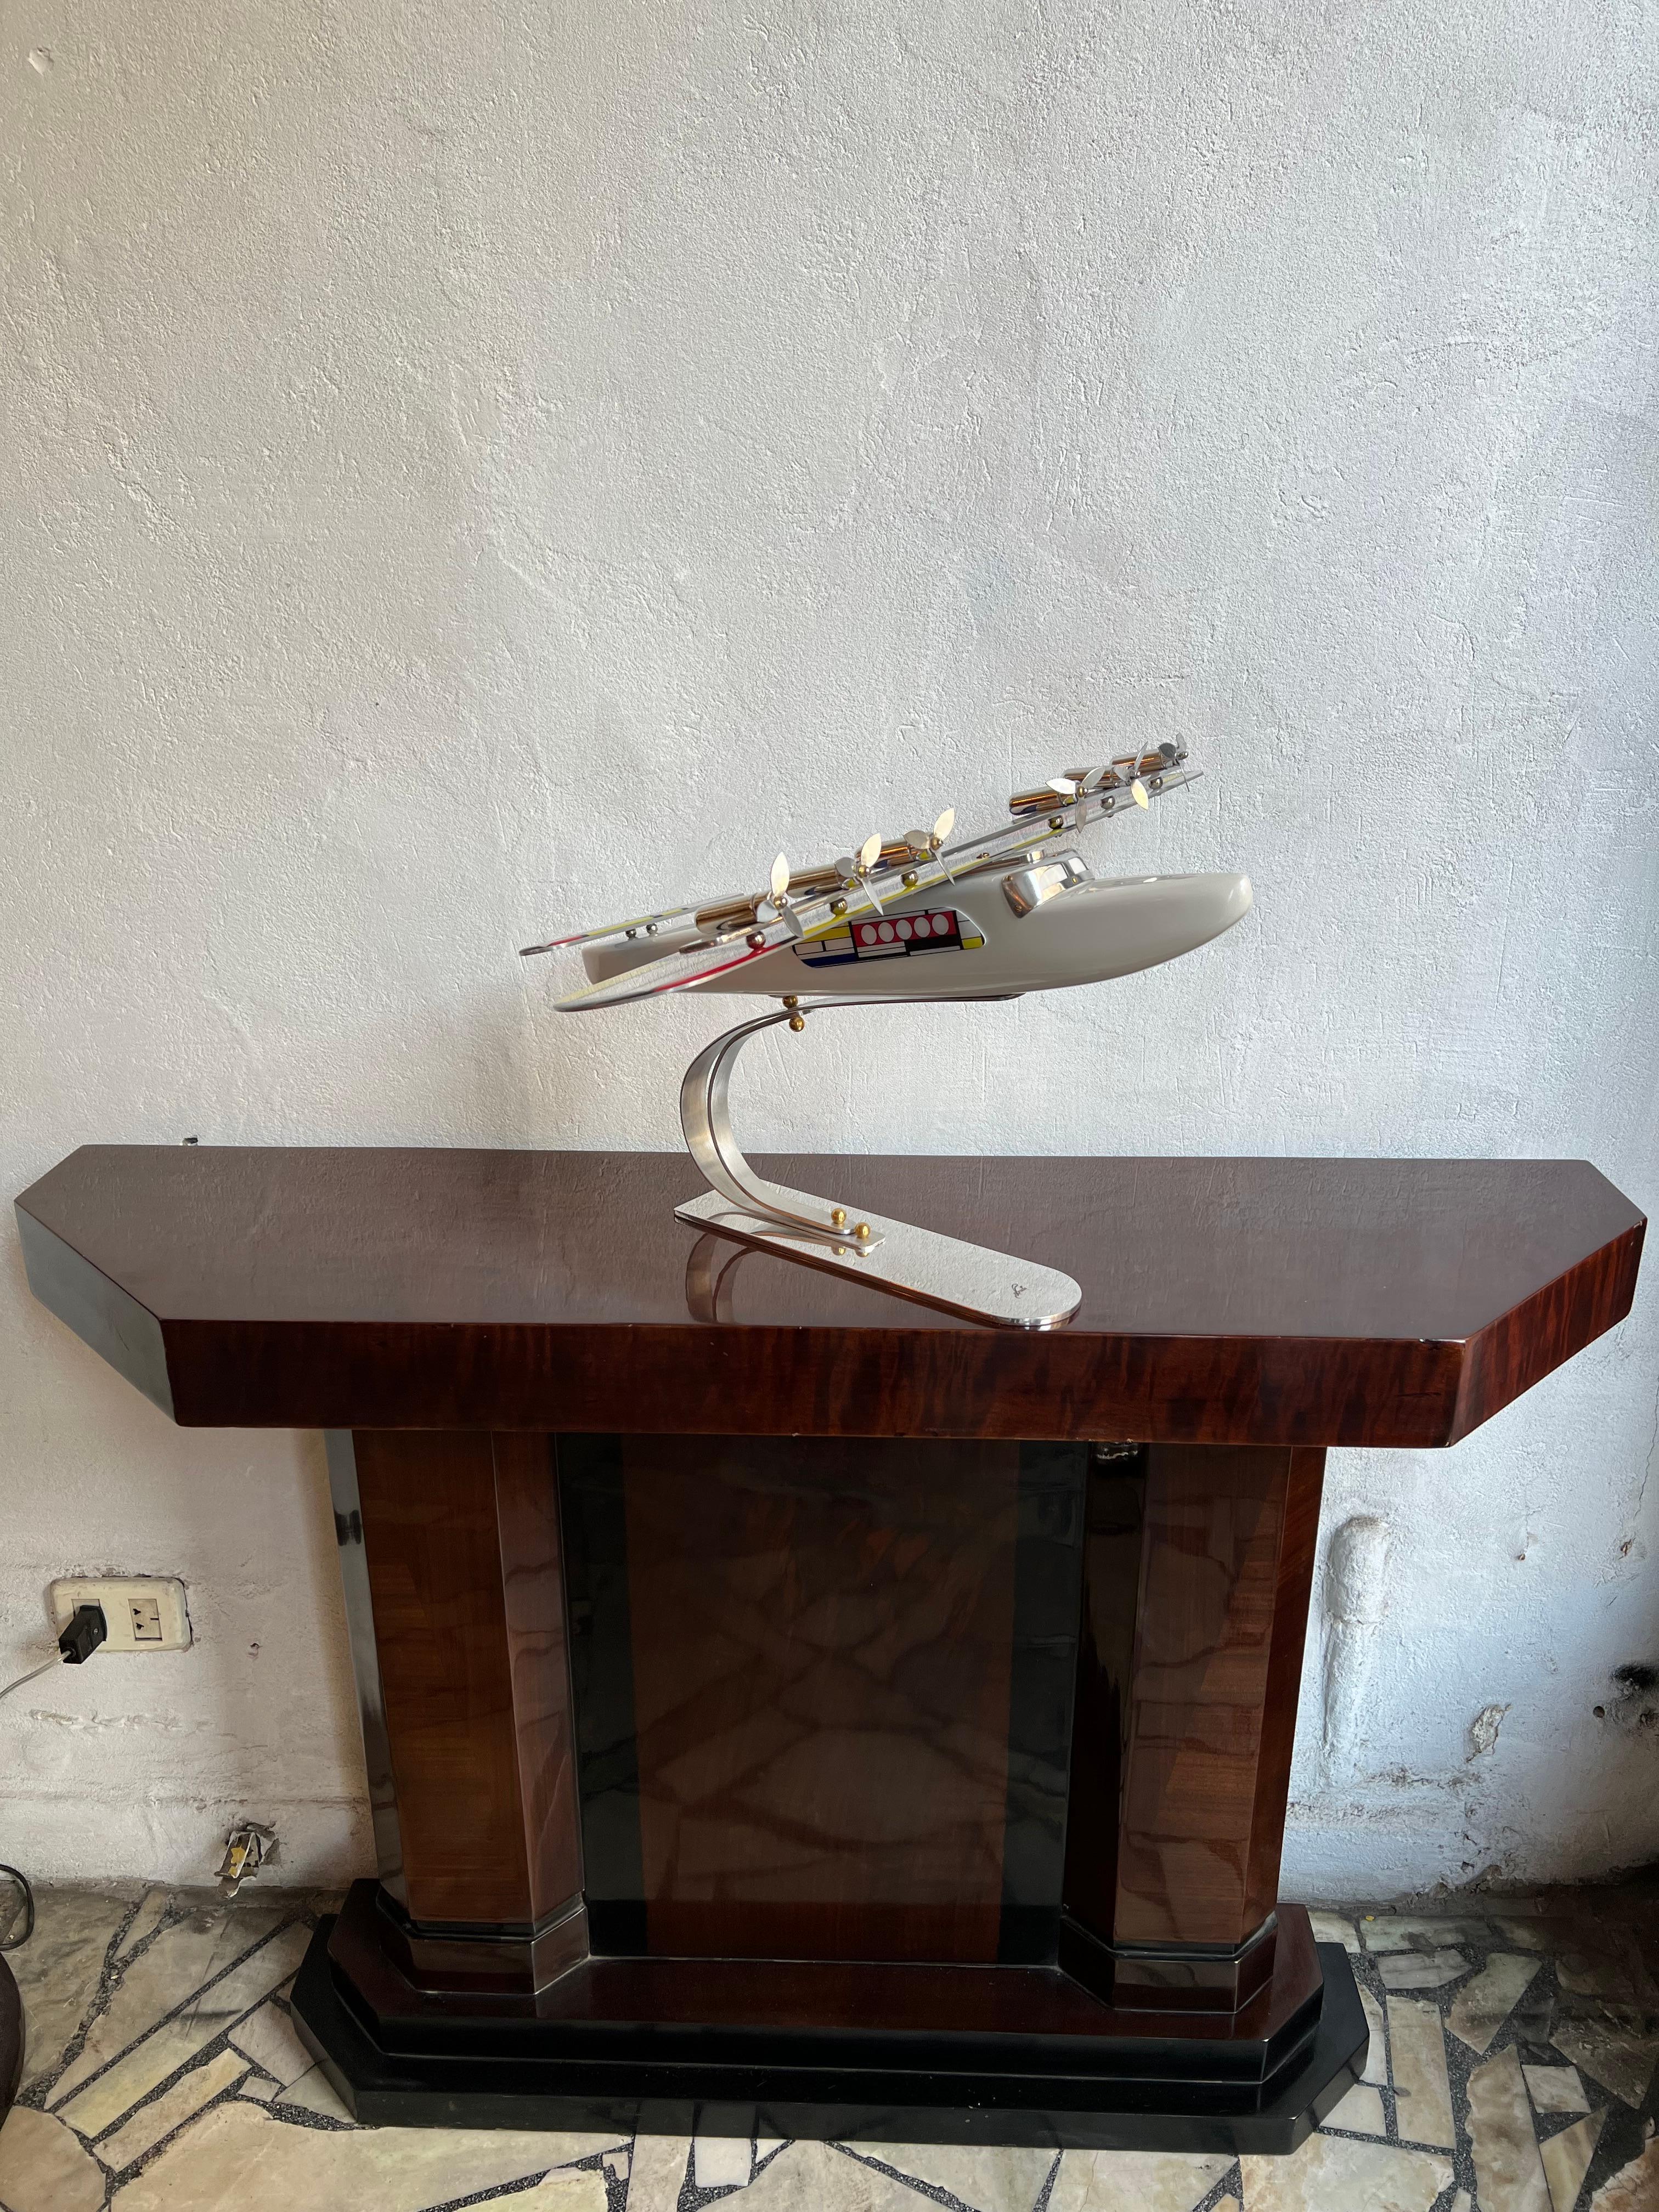 Art Deco Inspired Airplane in Wood and Steel Designer, Marcelo Peña, 2014 For Sale 5